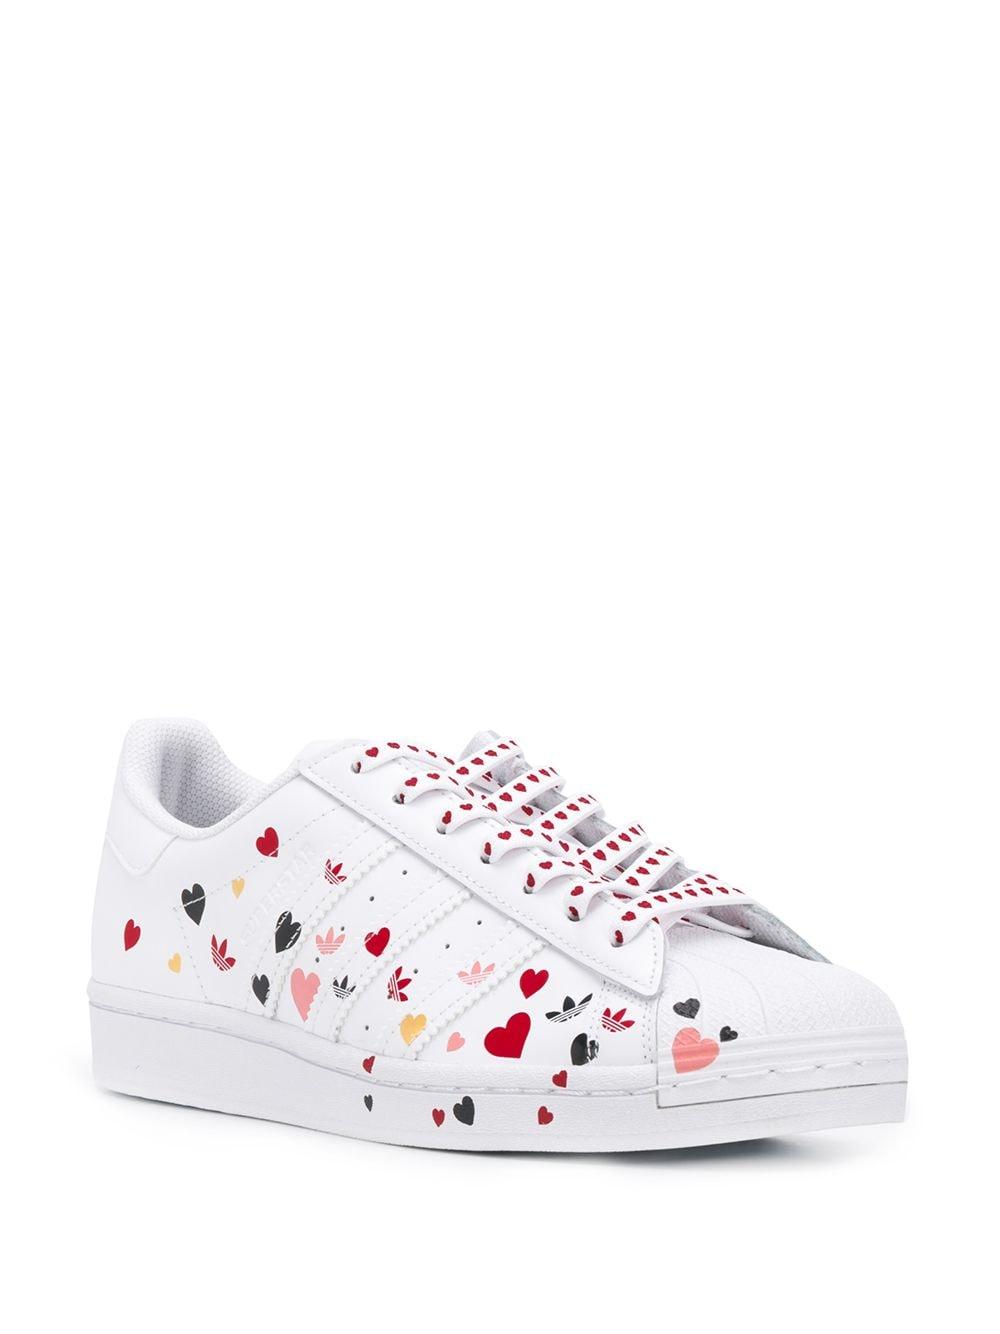 adidas Superstar Heart-print Sneakers in White - Lyst